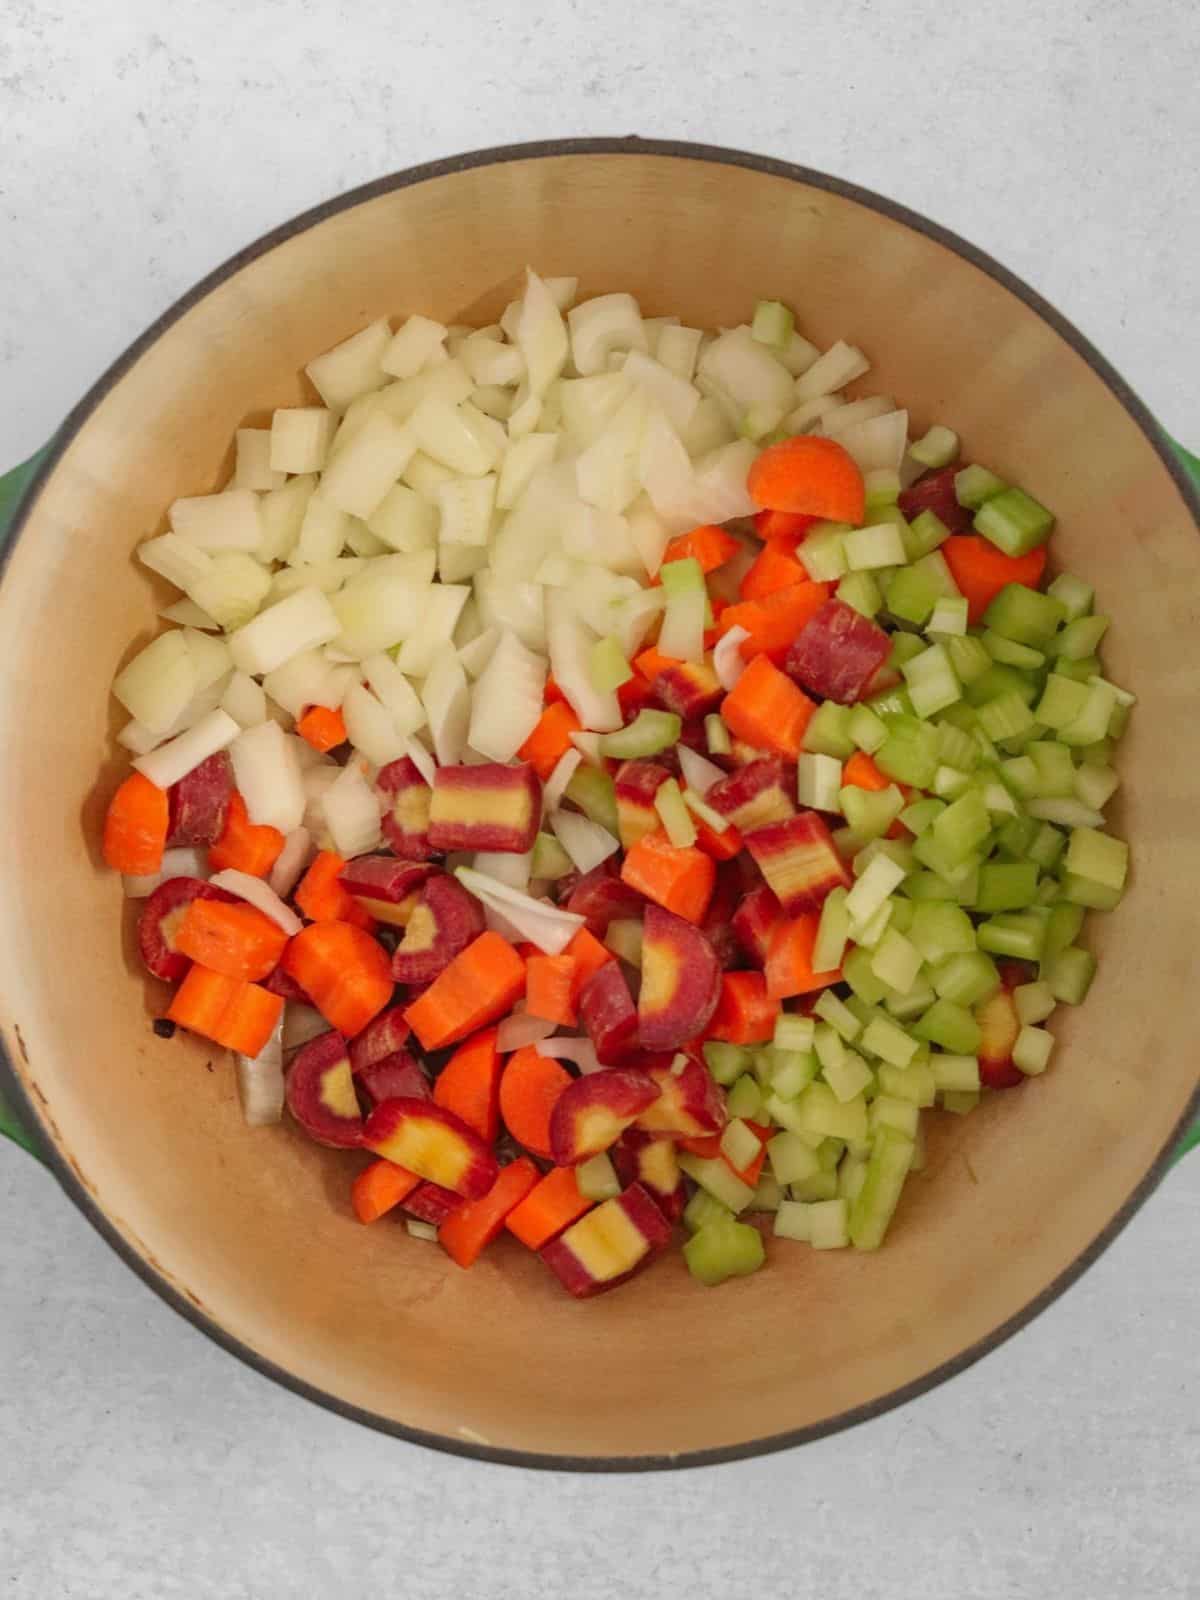 Carrots, celery and onion